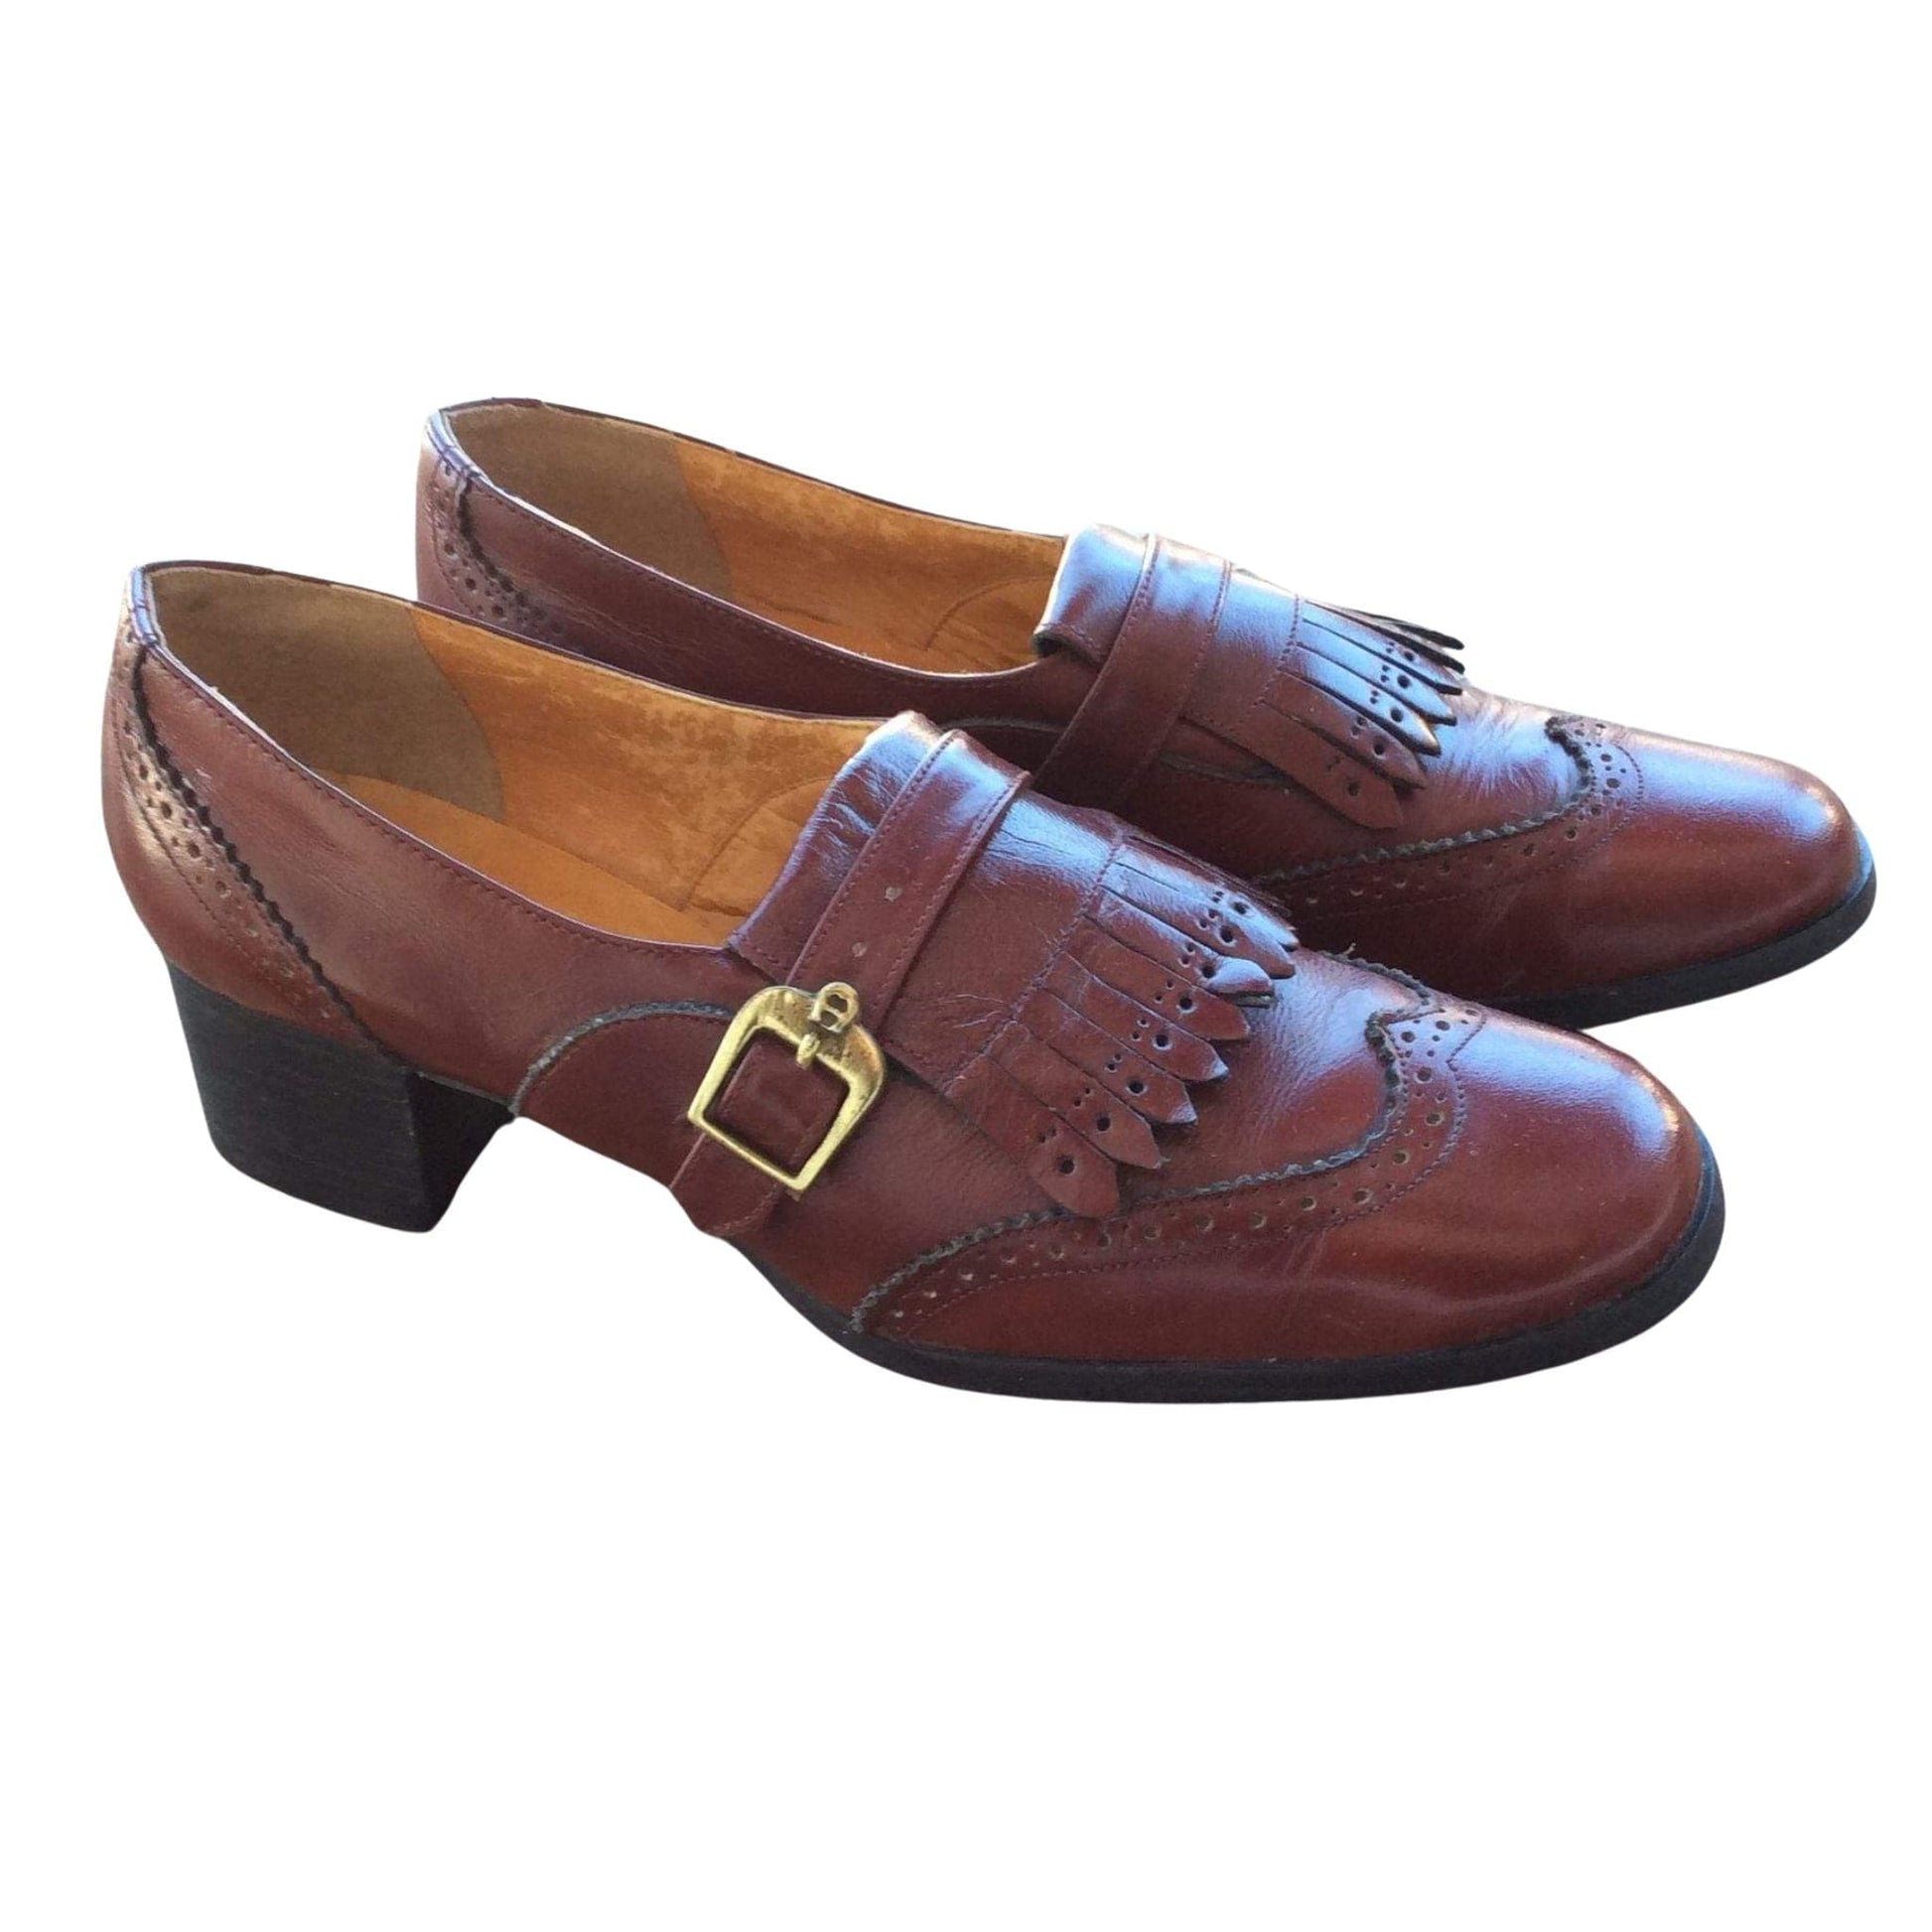 Etienne Aigner Kilted Loafers 7.5 / Burgundy / Classic